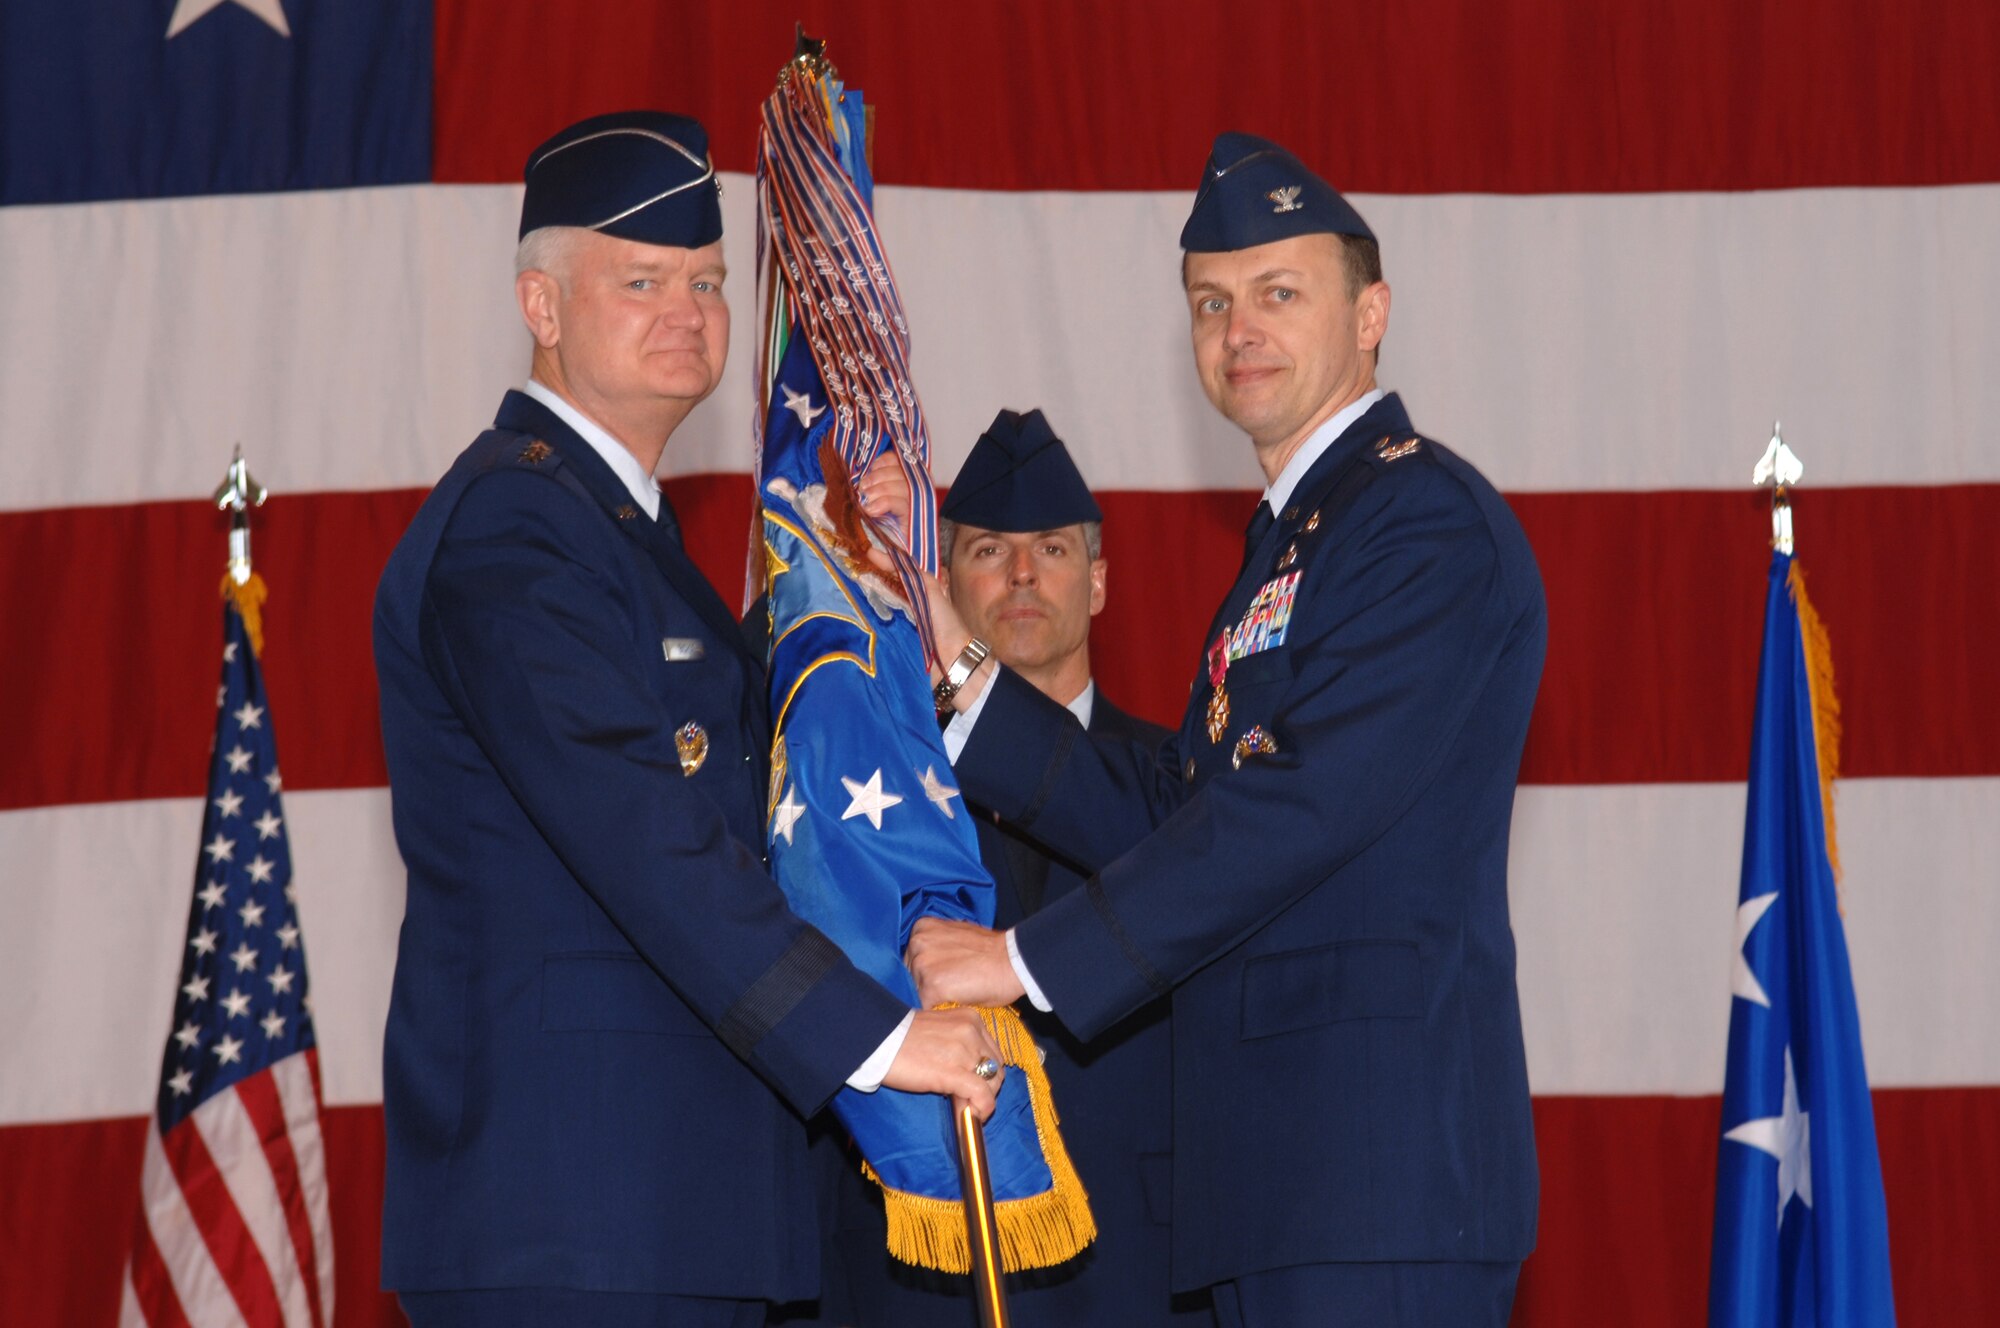 Col. Earl Matthews, 435th Air Base Wing commander, relinquishes command to Lt. Gen. Rod Bishop, 3rd Air Force commander, while Chief Master Sgt. Dave Spector, 435th ABW command chief looks on May 2 at a ceremony in H-3 on Ramstein. (U.S. Air Force Photo by Airman 1st Class Tony Ritter) (Released)

